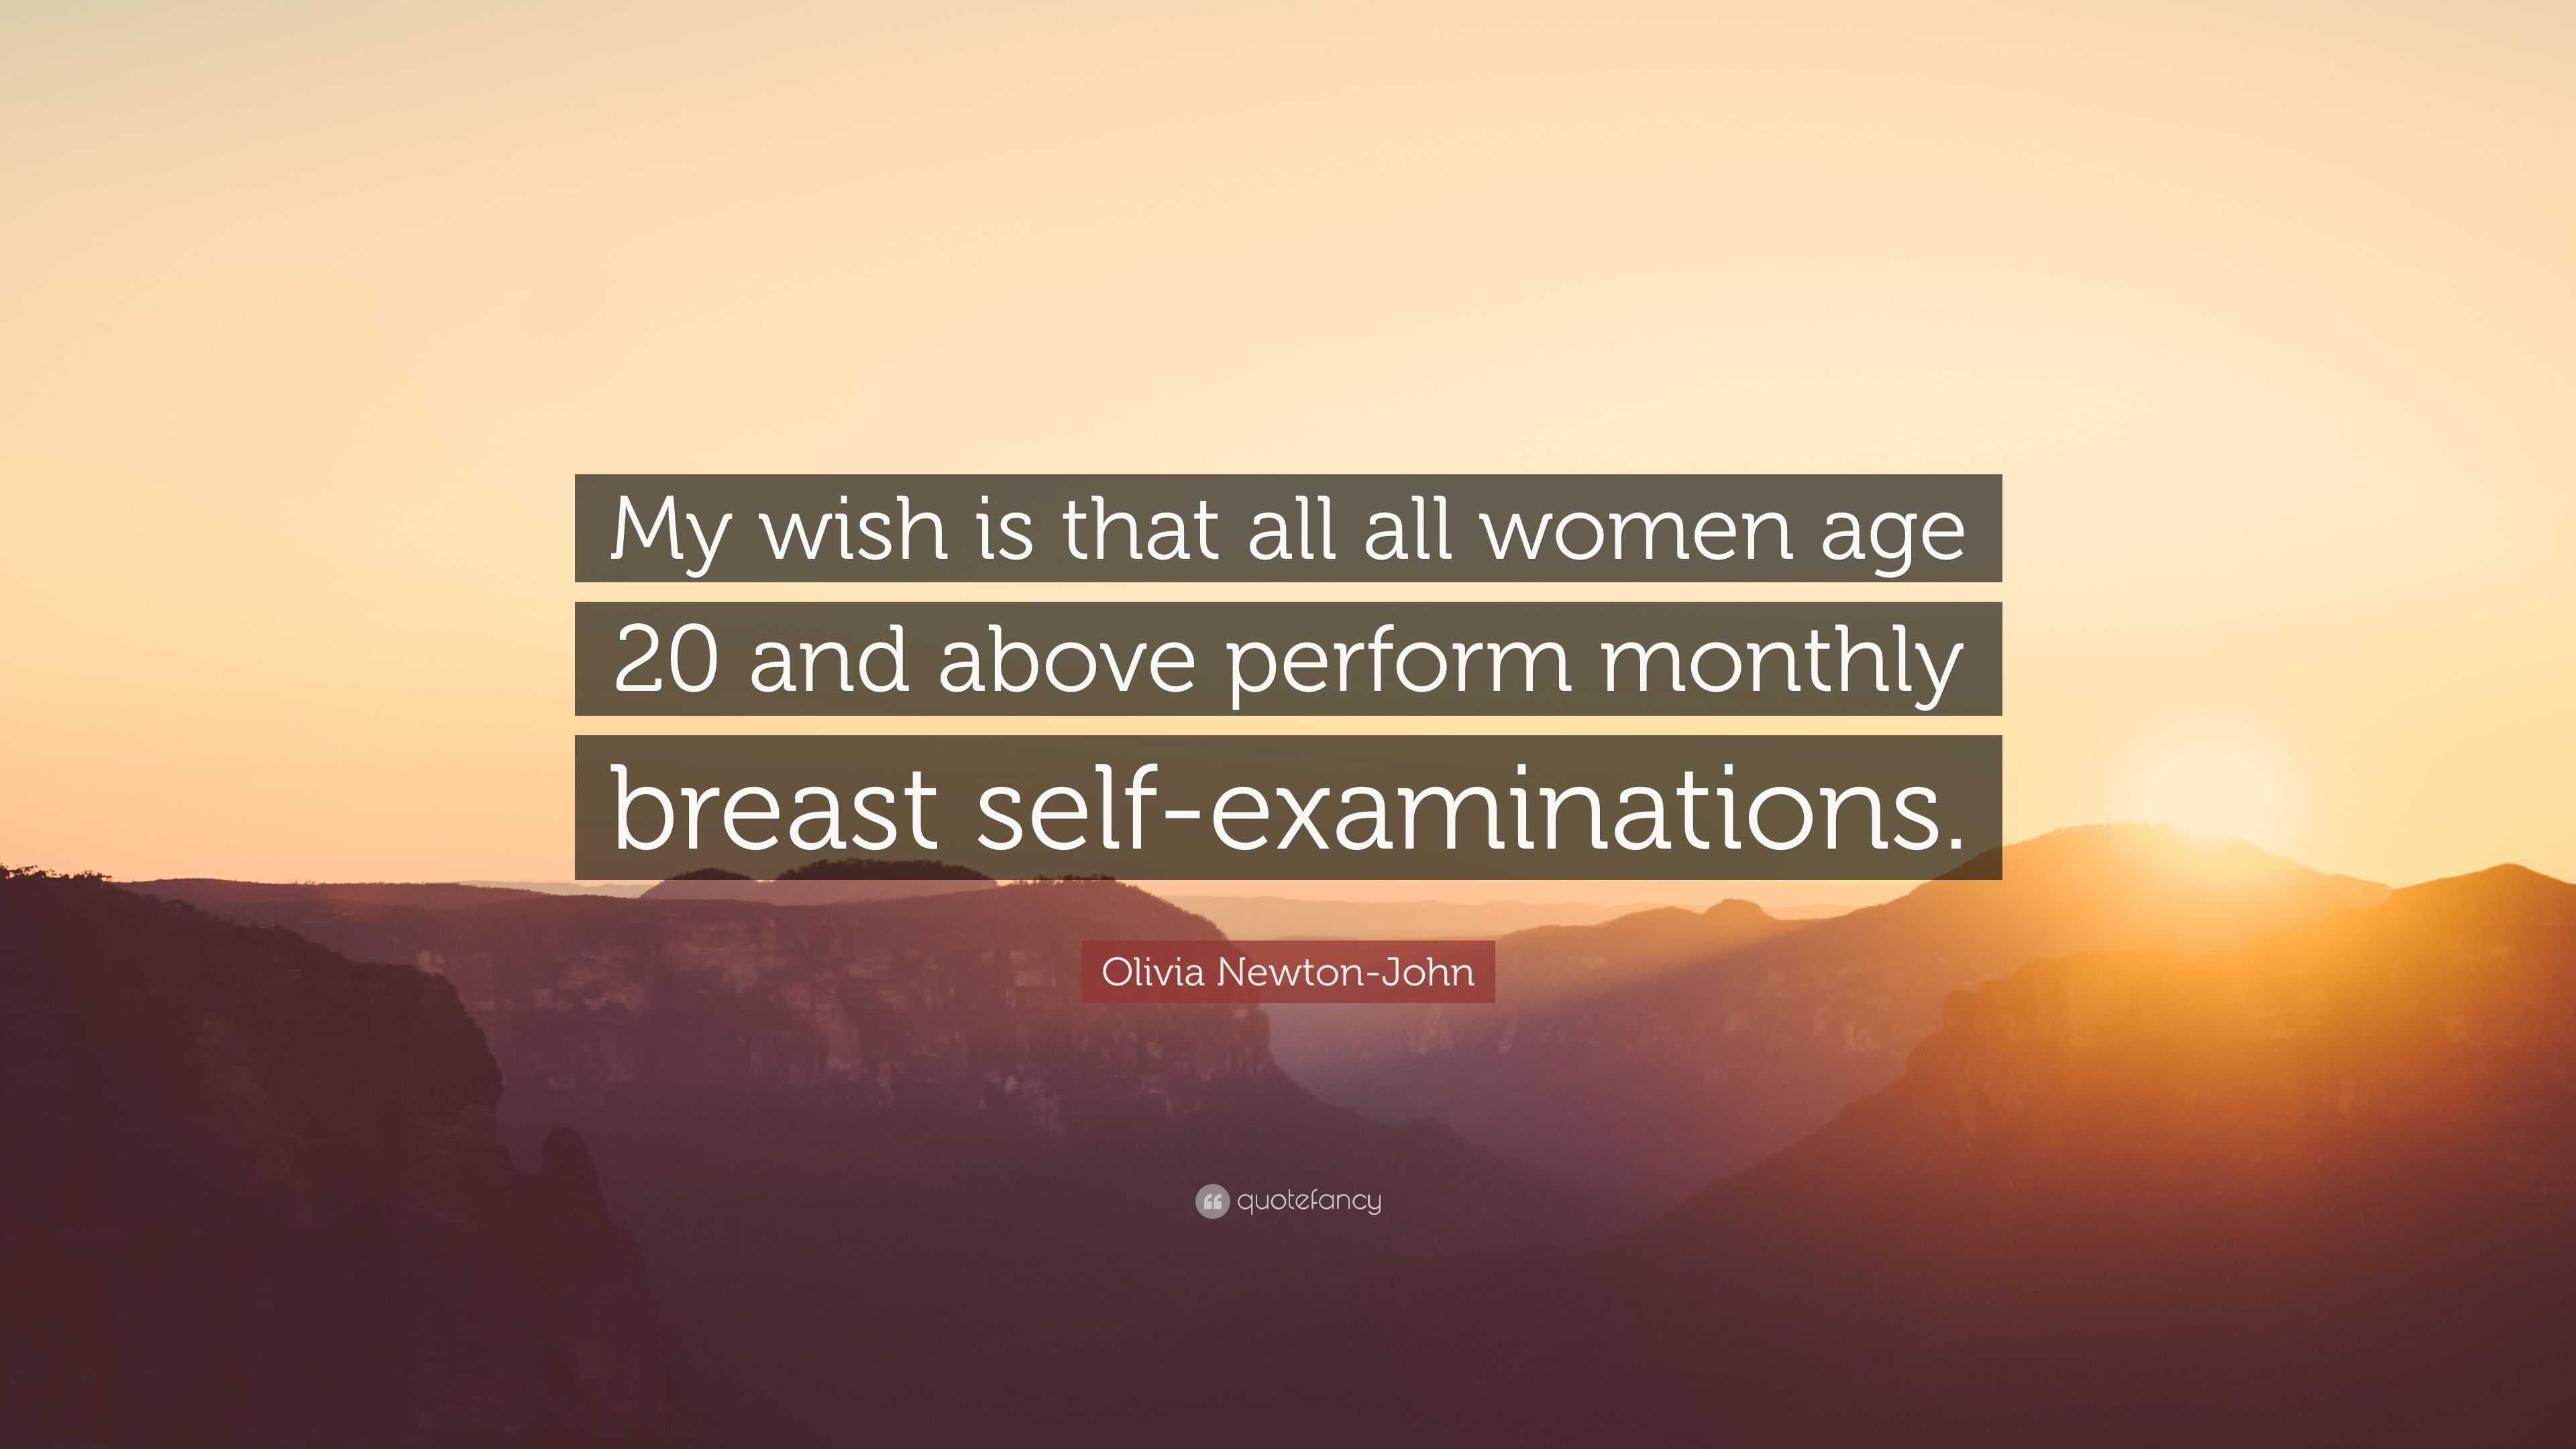 https://quotefancy.com/media/wallpaper/3840x2160/3445034-Olivia-Newton-John-Quote-My-wish-is-that-all-all-women-age-20-and.jpg